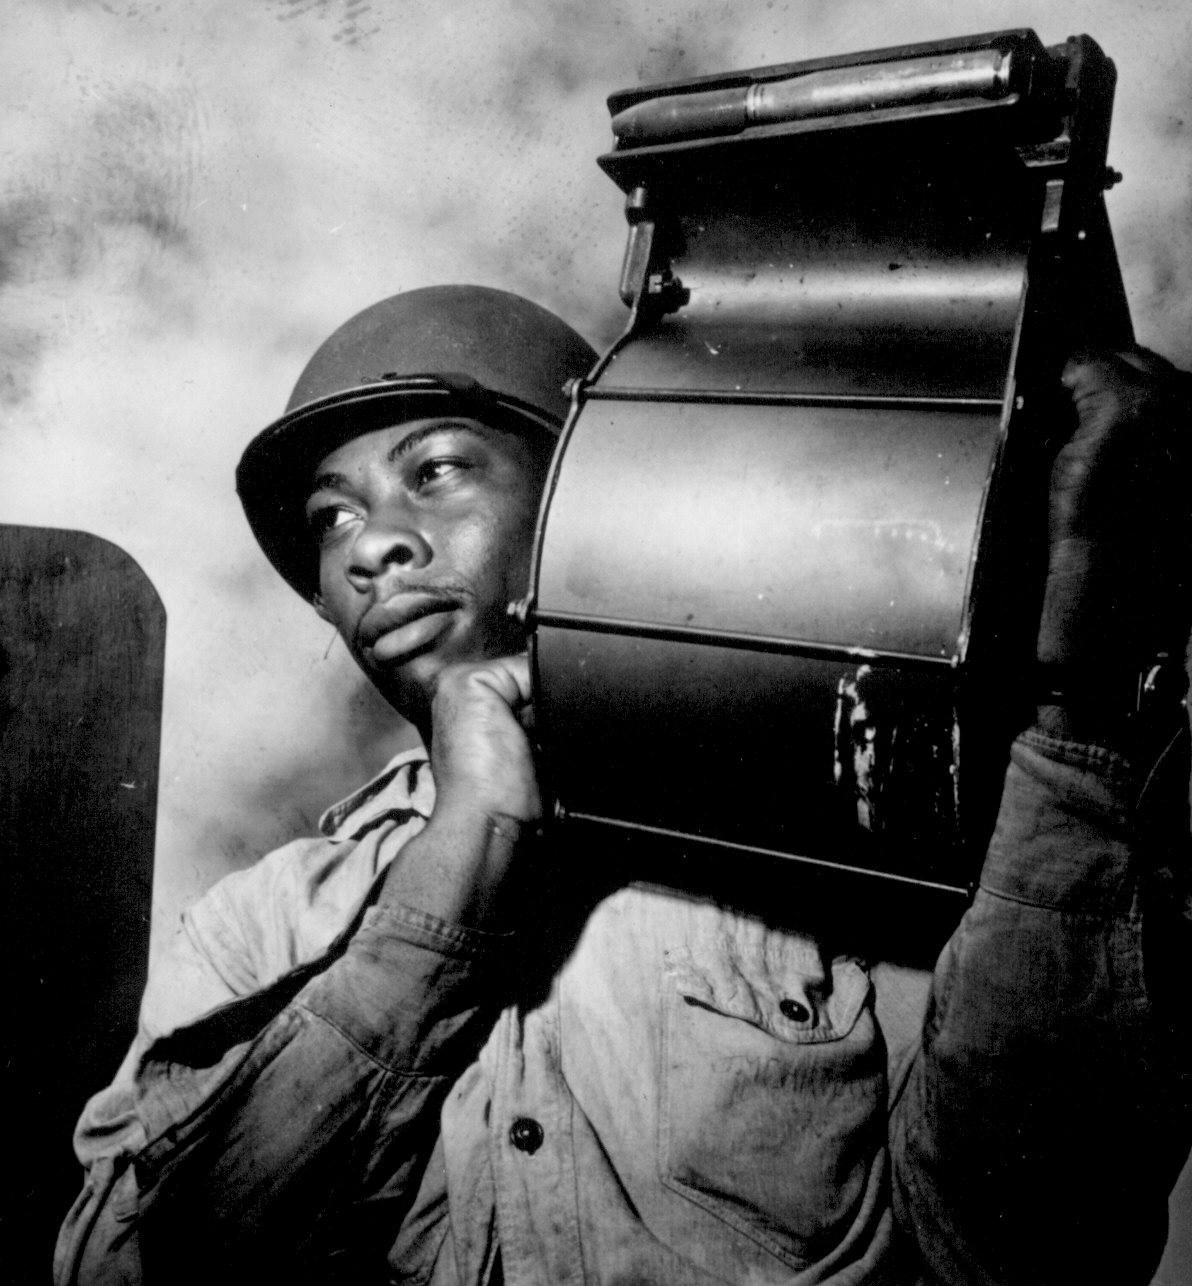 US Navy African-American Miles Davis King carrying a loaded magazine for a 20-mm gun aboard CVE USS Tulagi en route to France, Aug 1944